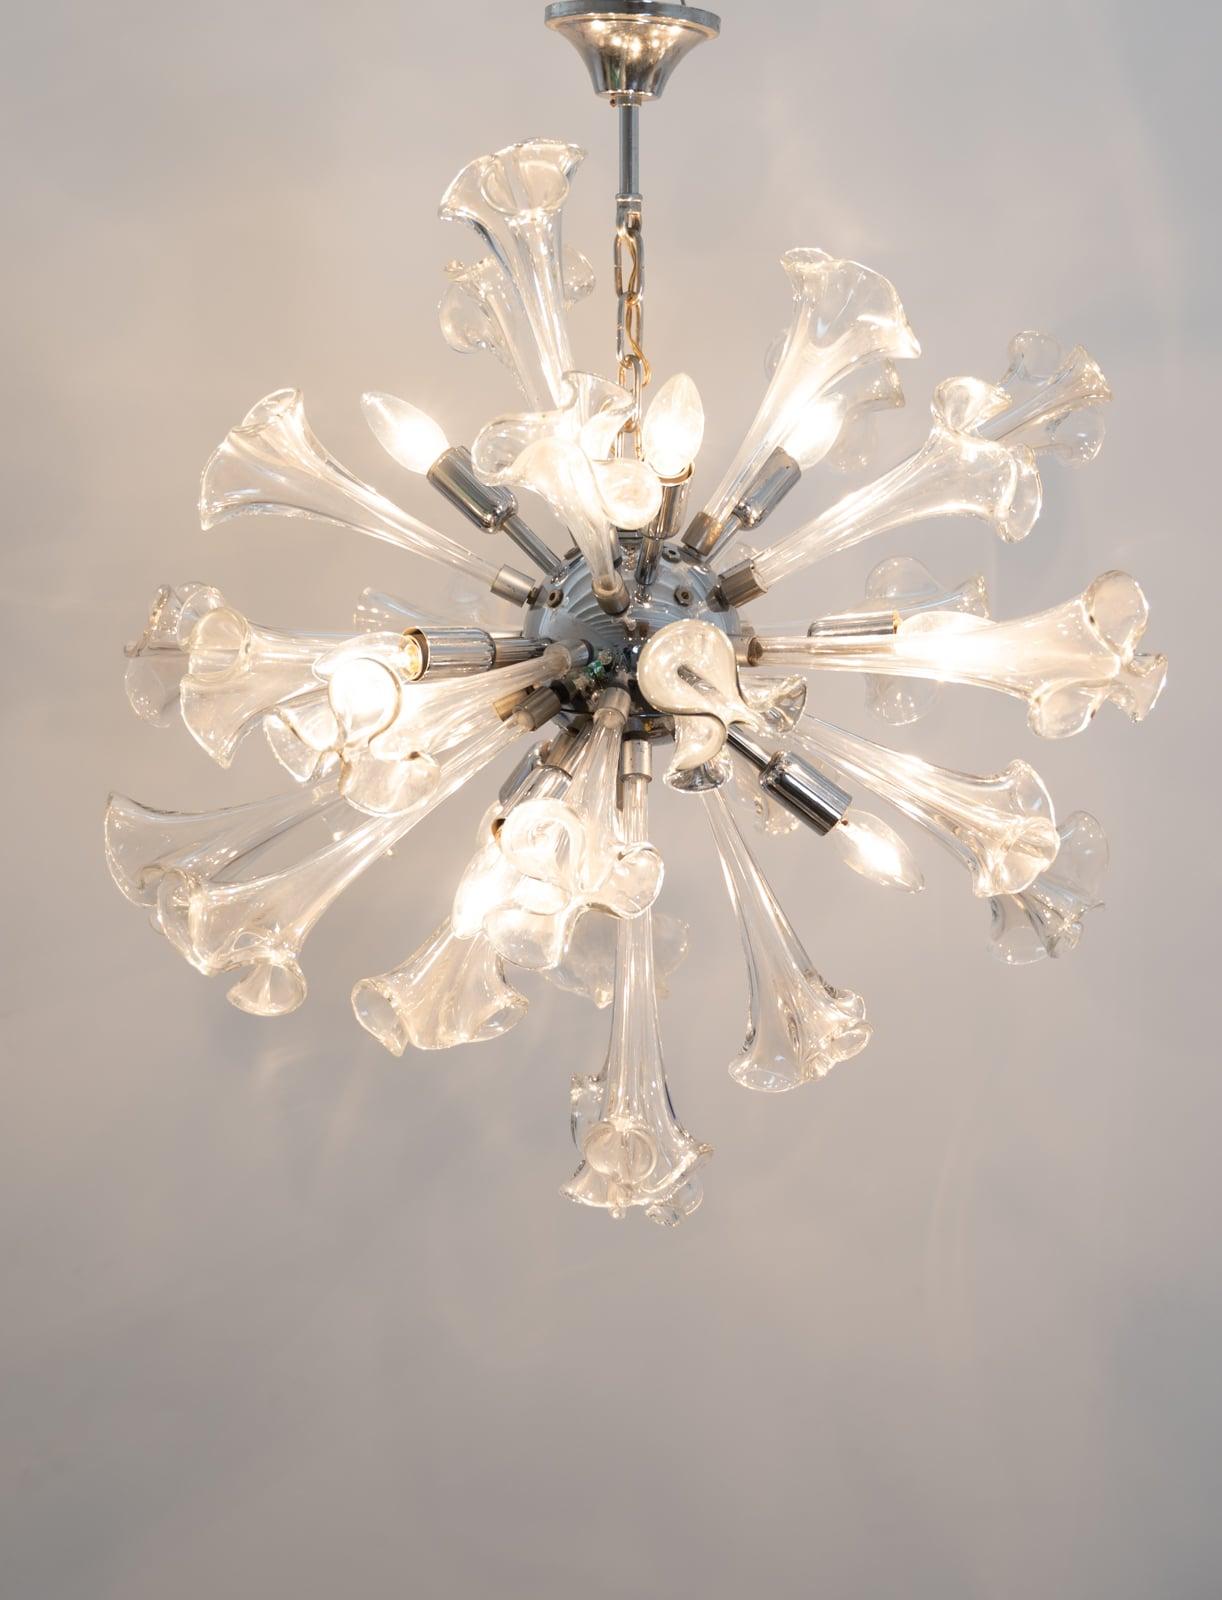 Murano pendant light glass and chrome sputnik pendant light with 27 glass flower appliques
Murano Italy 1960s

Rewired and ready for use.